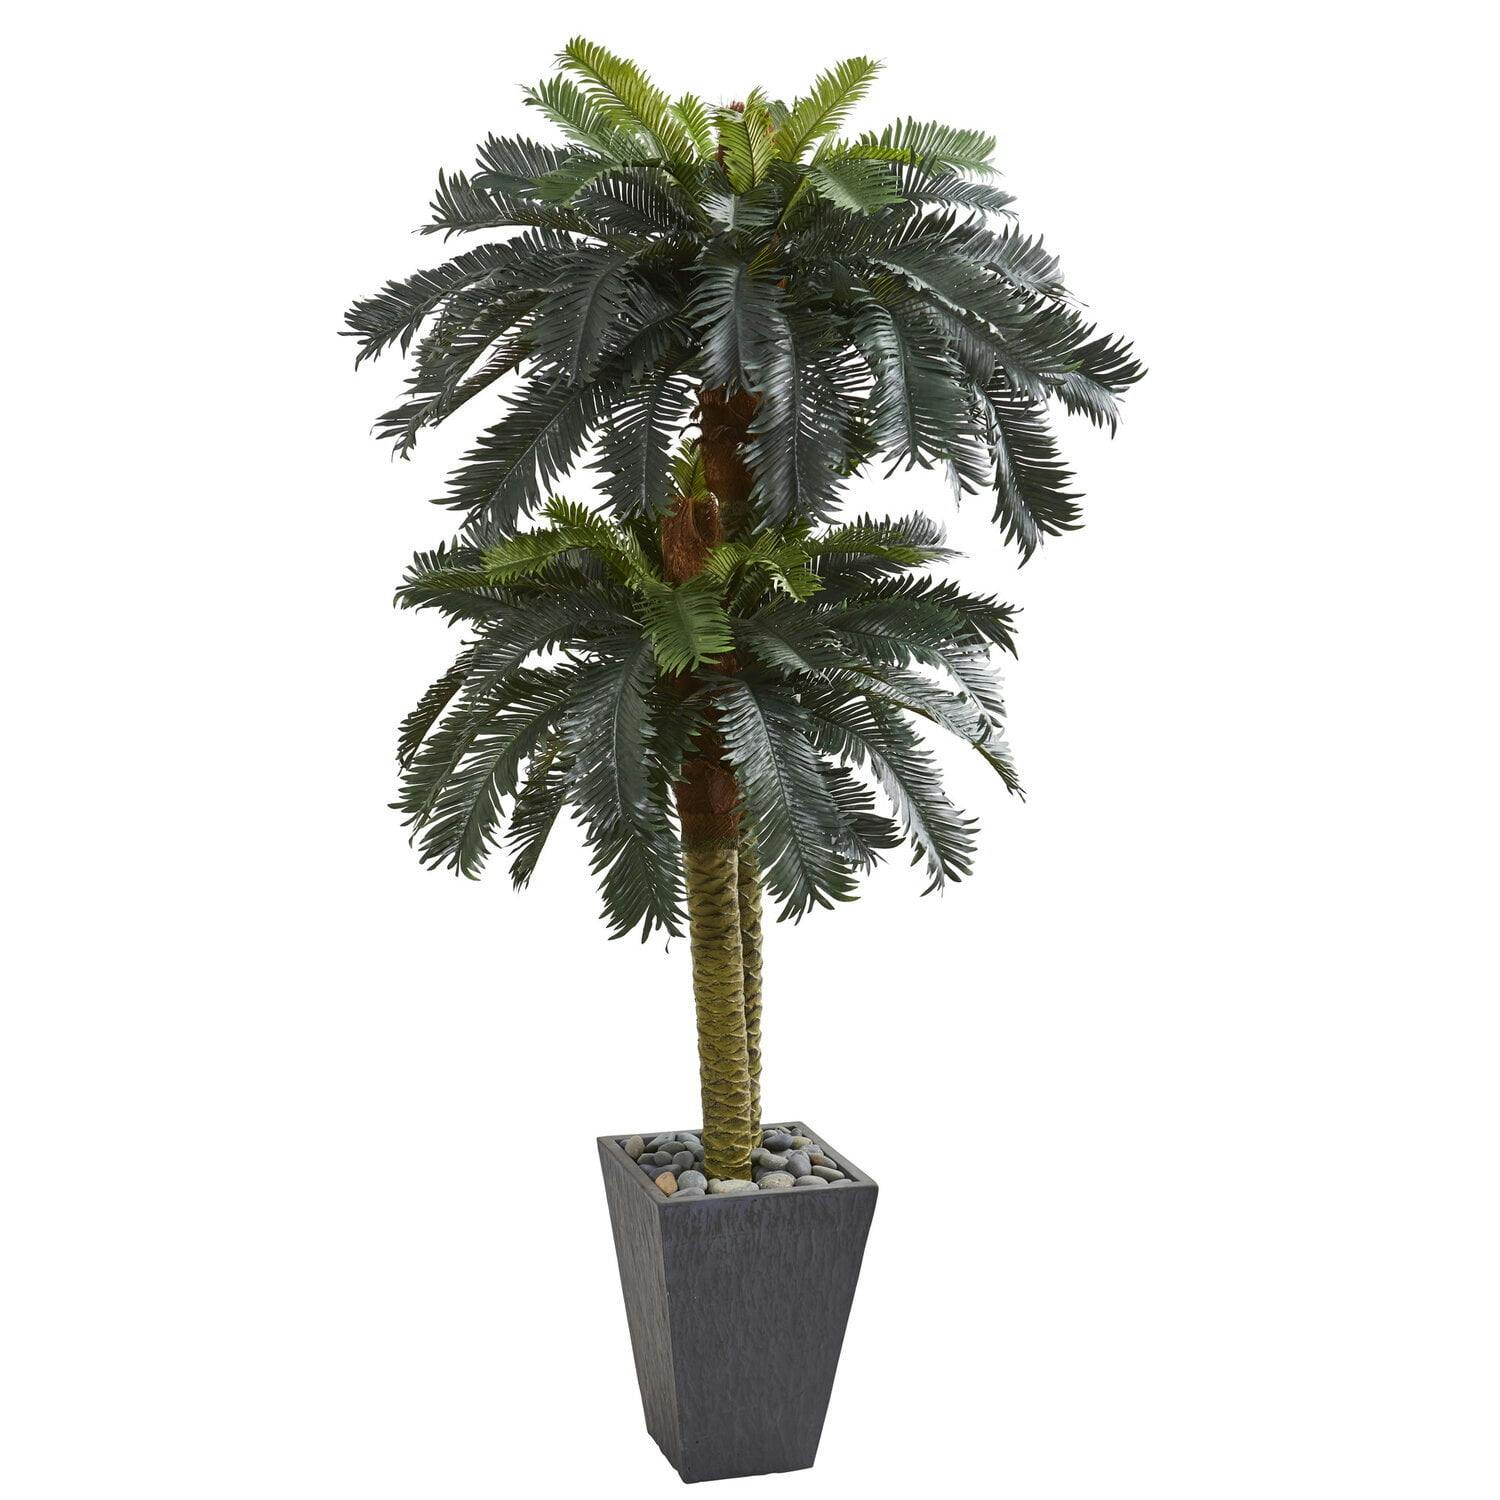 Tropical Mirage 6' Double Sago Palm in Gray Slate Planter